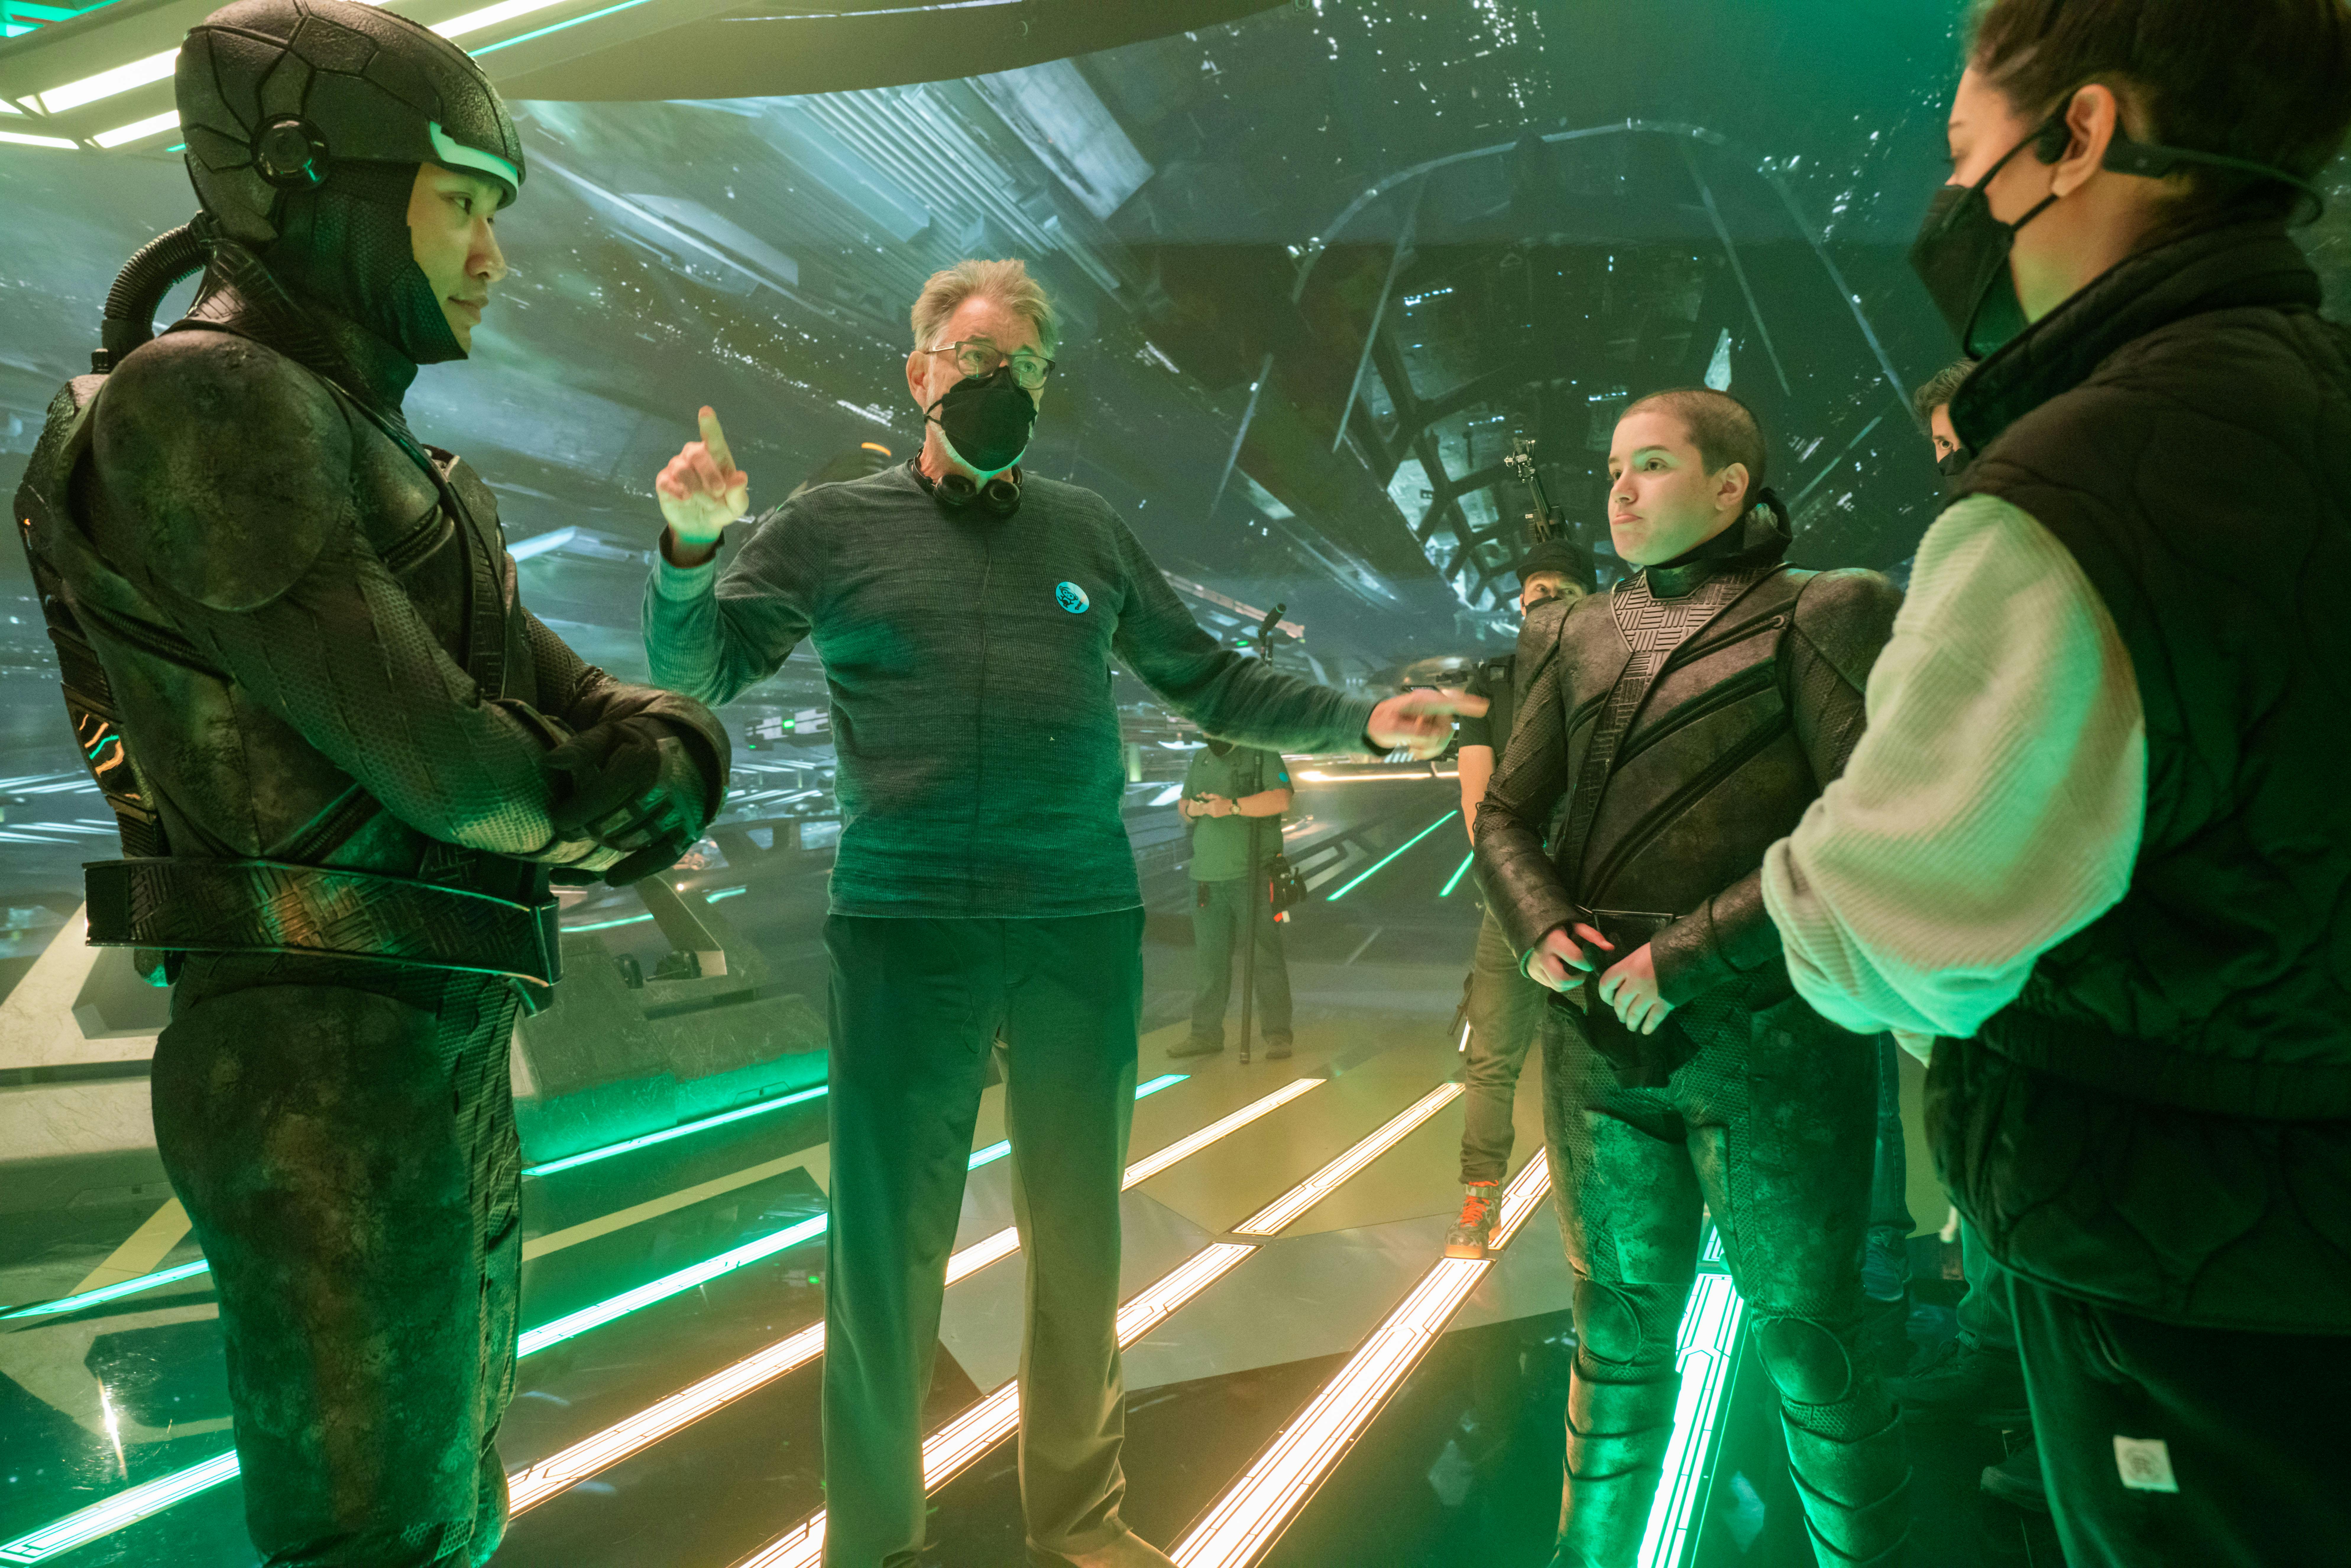 Behind-the-scenes of 'Lagrange Point' - on the set of the Breen Imperium dreadnaught bridge, Jonathan Frakes gives direction to Patrick Kwok-Choon and Blu del Barrio